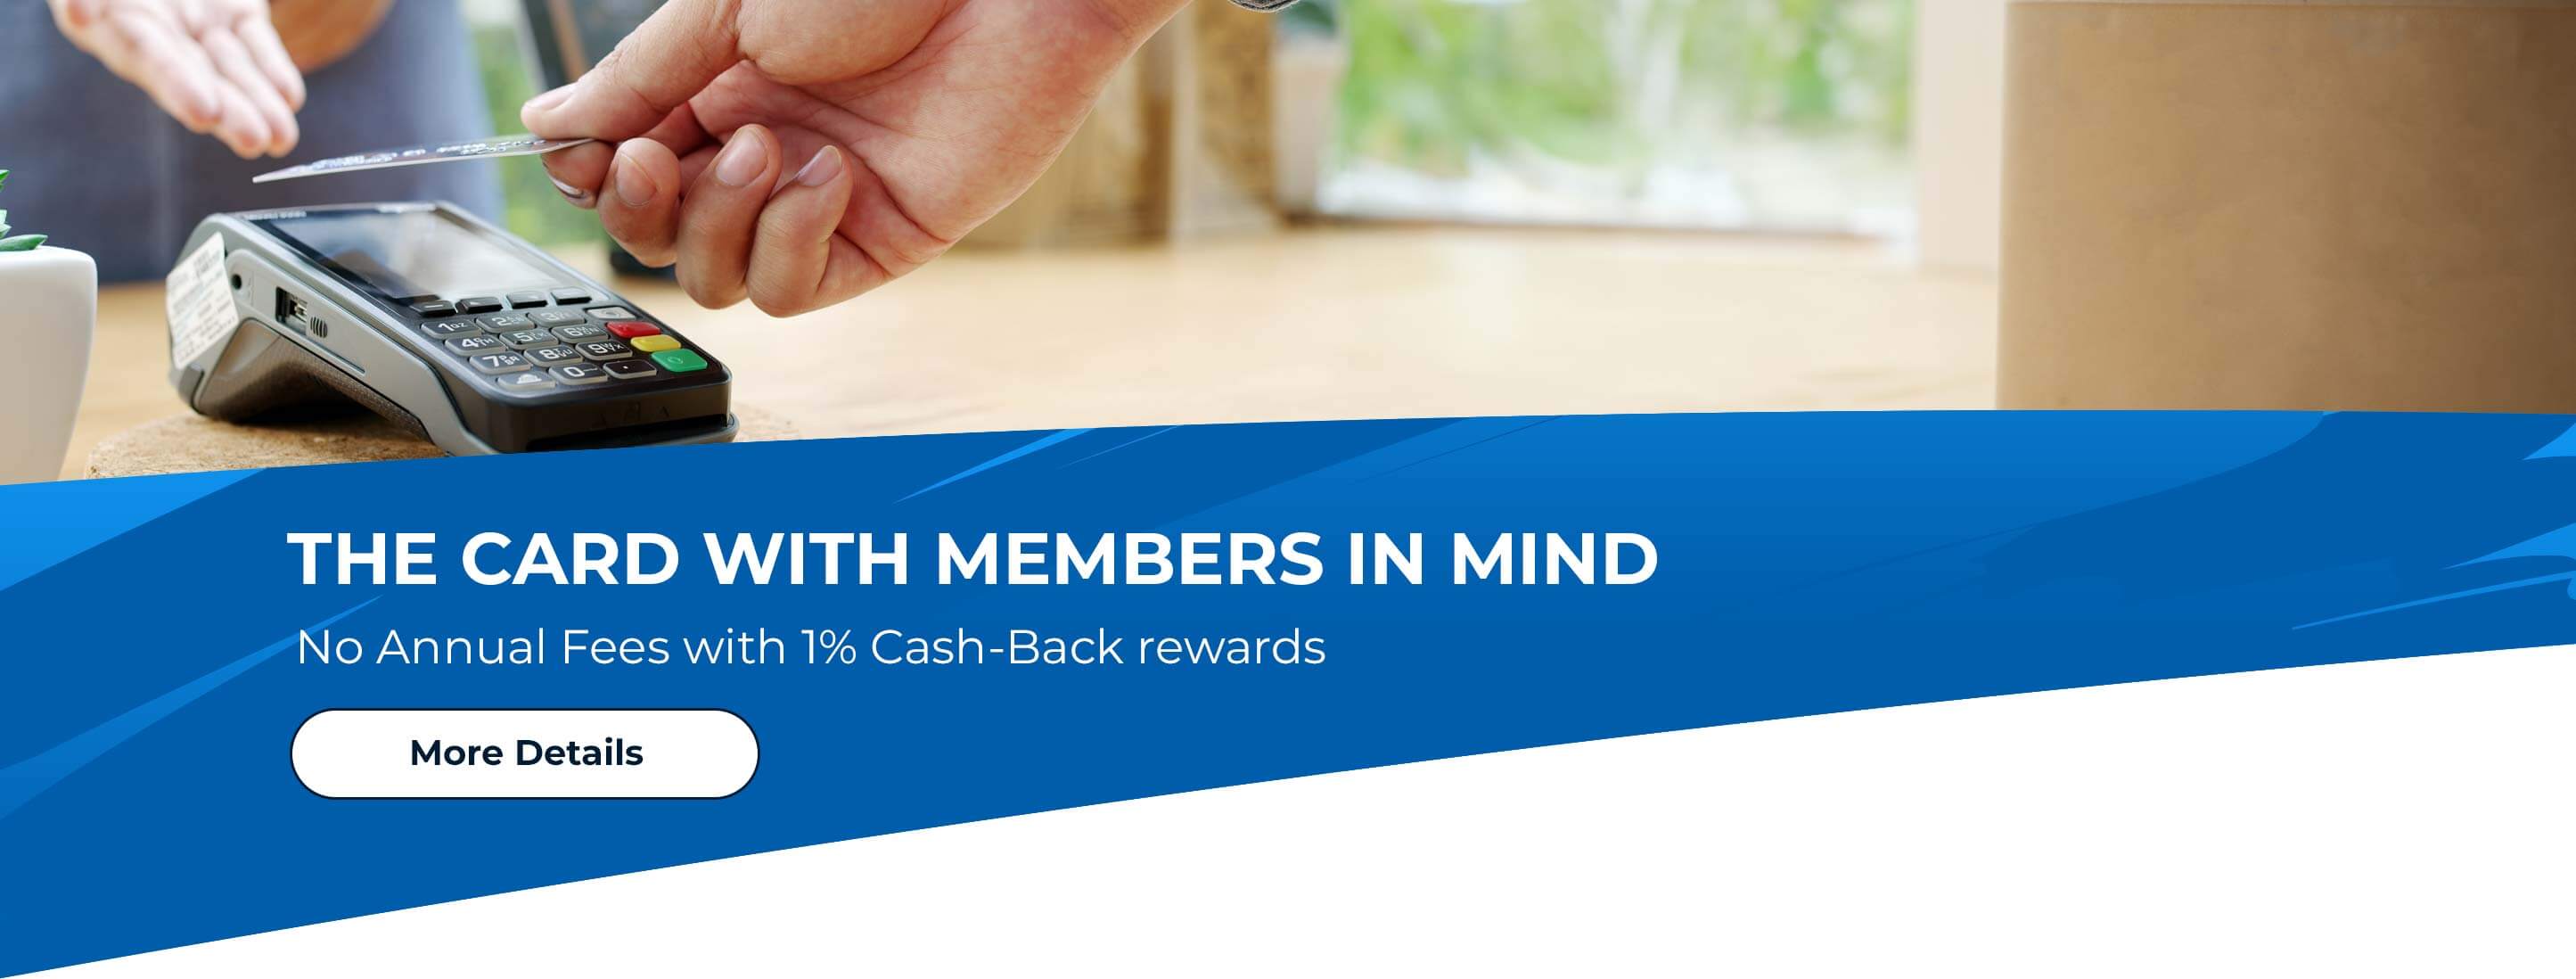 The Card with Members in Mind. No Annual Fees with 1% Cash-Back Rewards